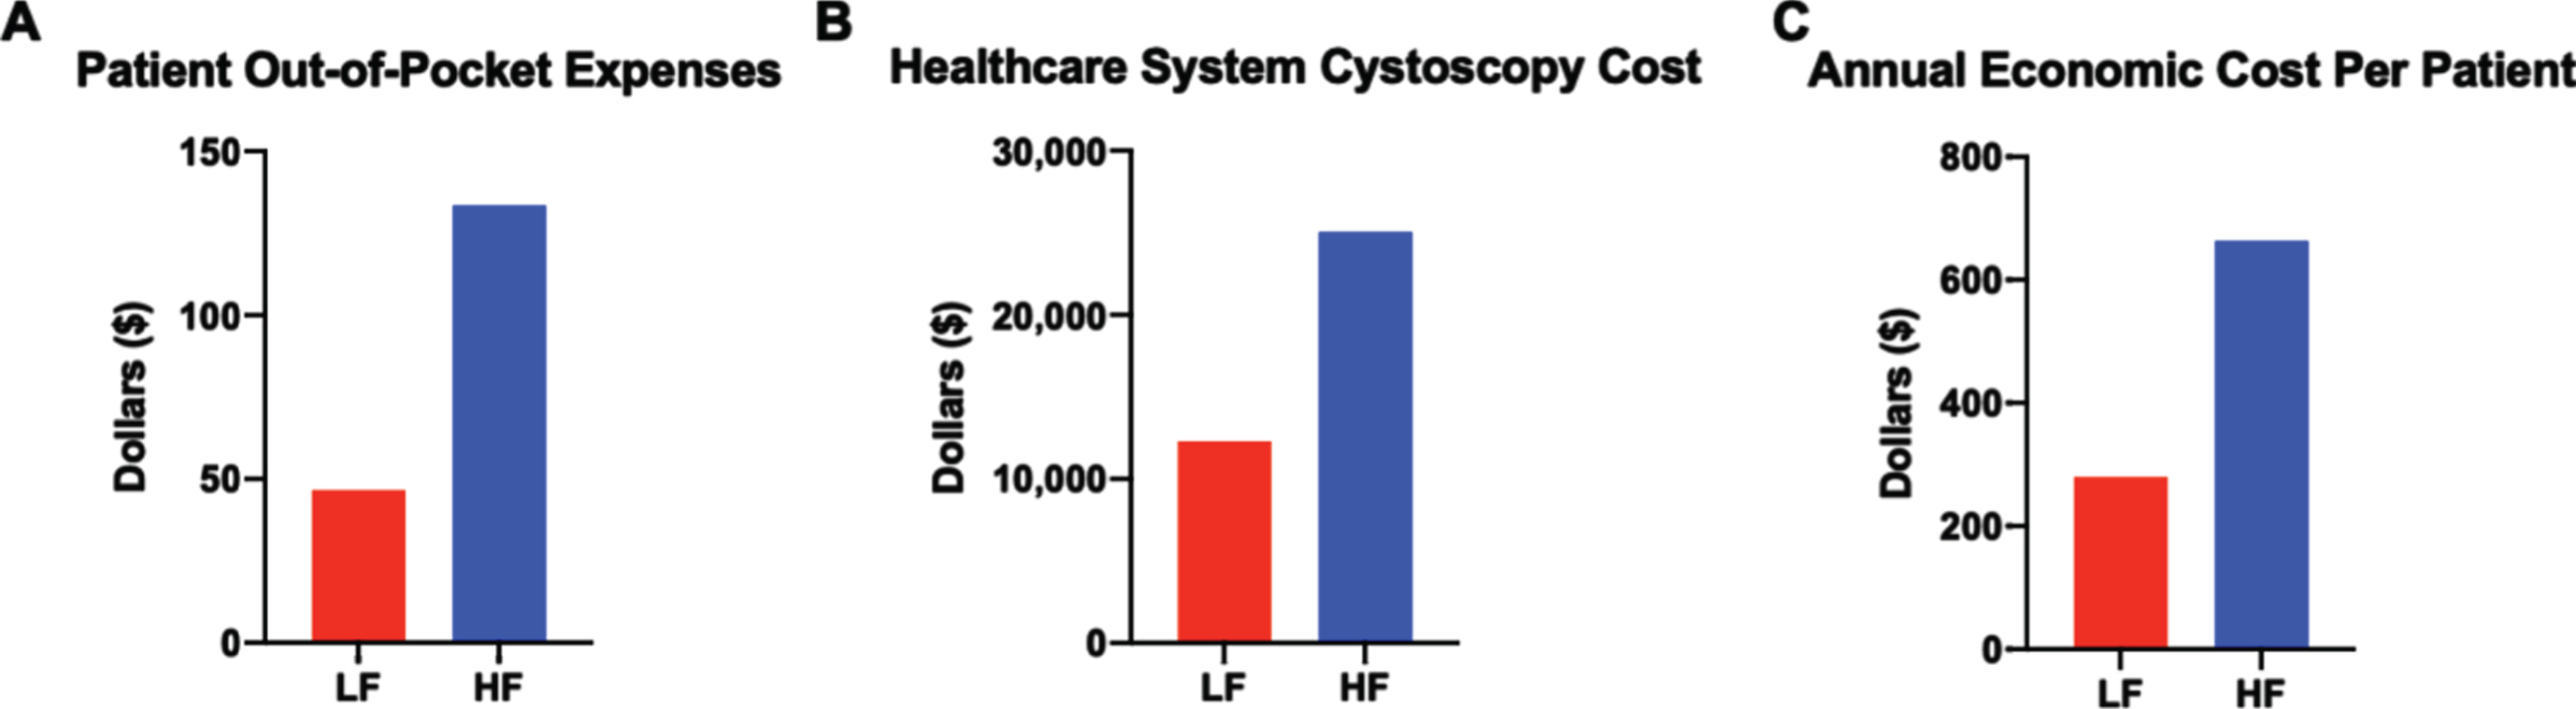 Cystoscopy surveillance regimen impacts healthcare system expenses more than patient out-of-pocket costs. (A) Average patient out-of-pocket costs for the duration of the surveillance regimen. (B) Average healthcare system costs based on Medicare reimbursement per cystoscopy and cystoscopy frequency in each regimen. (C) Estimated annual economic cost calculated by adding yearly patient out-of-pocket costs and cystoscopy regimen reimbursement costs to healthcare system.